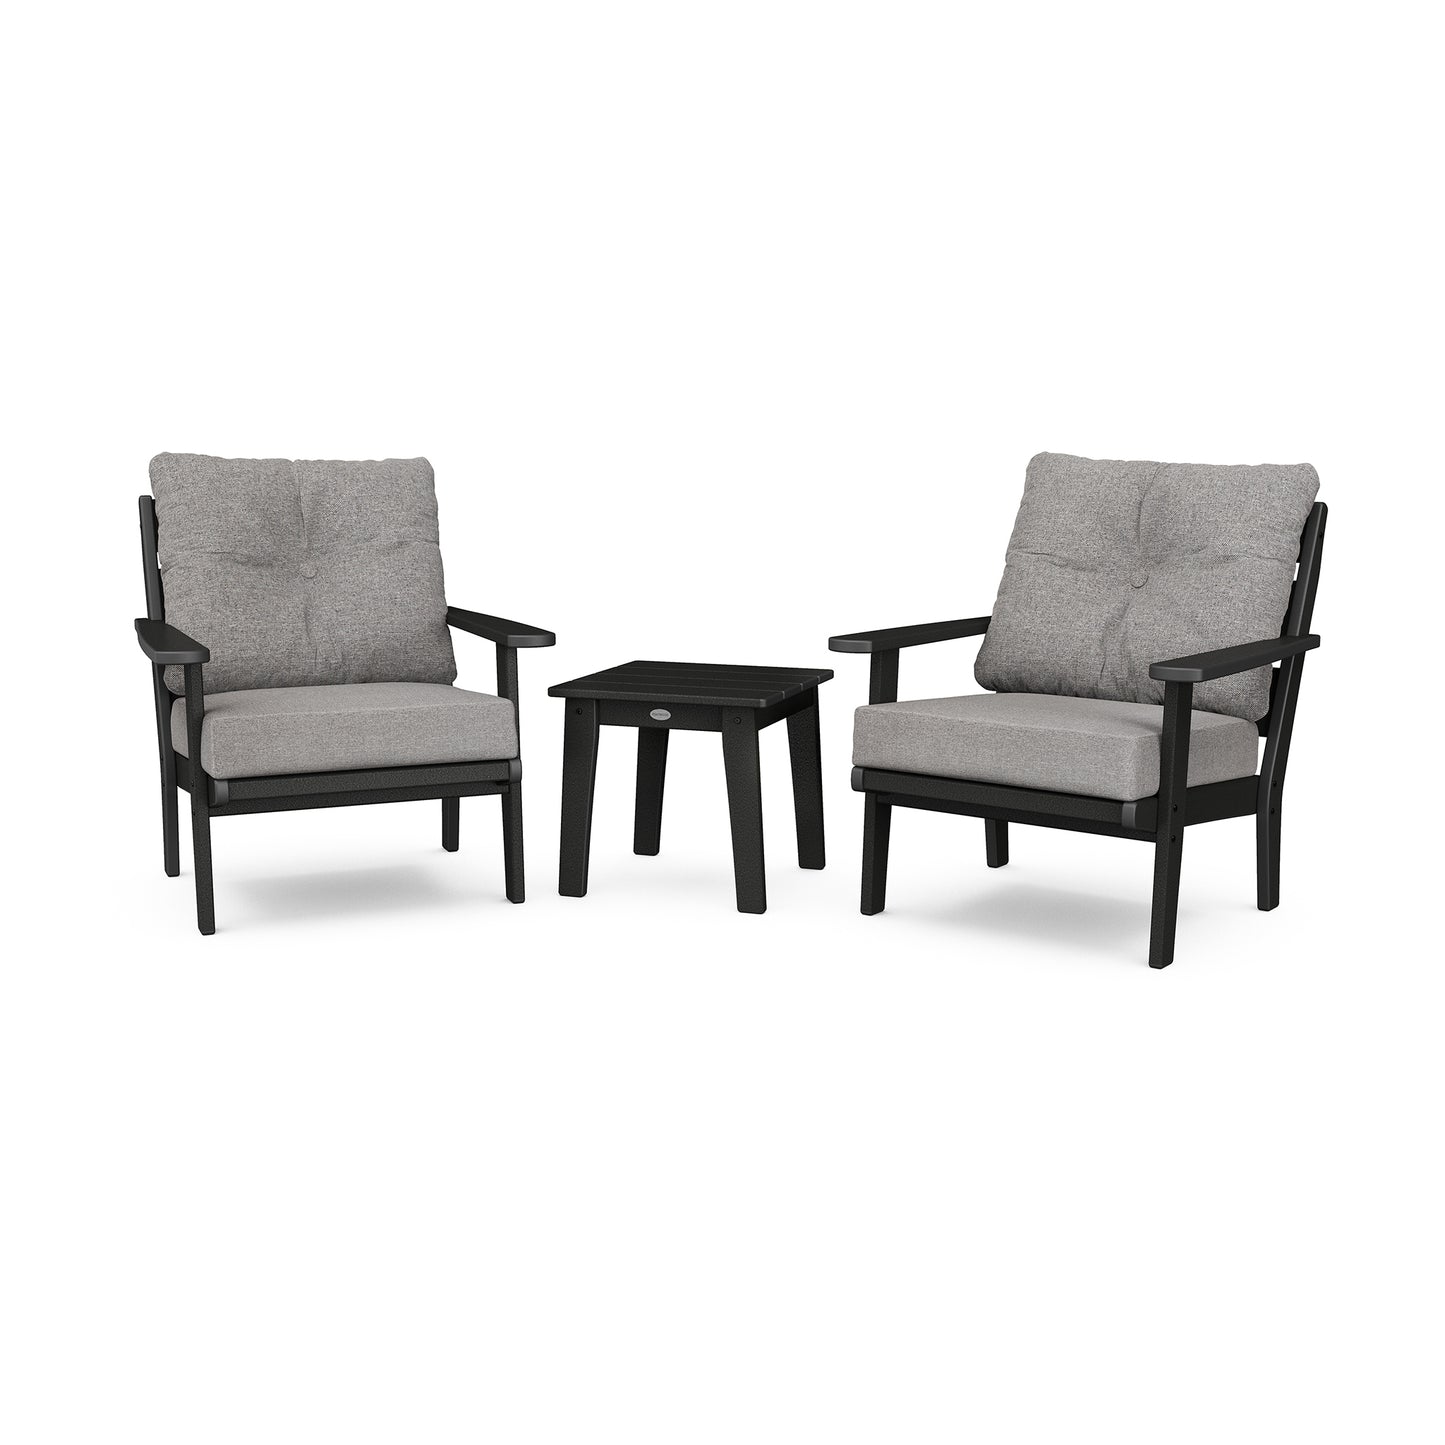 Two gray cushioned outdoor chairs with POLYWOOD Lakeside lumber frames and a matching black square side table, displayed against a white background.